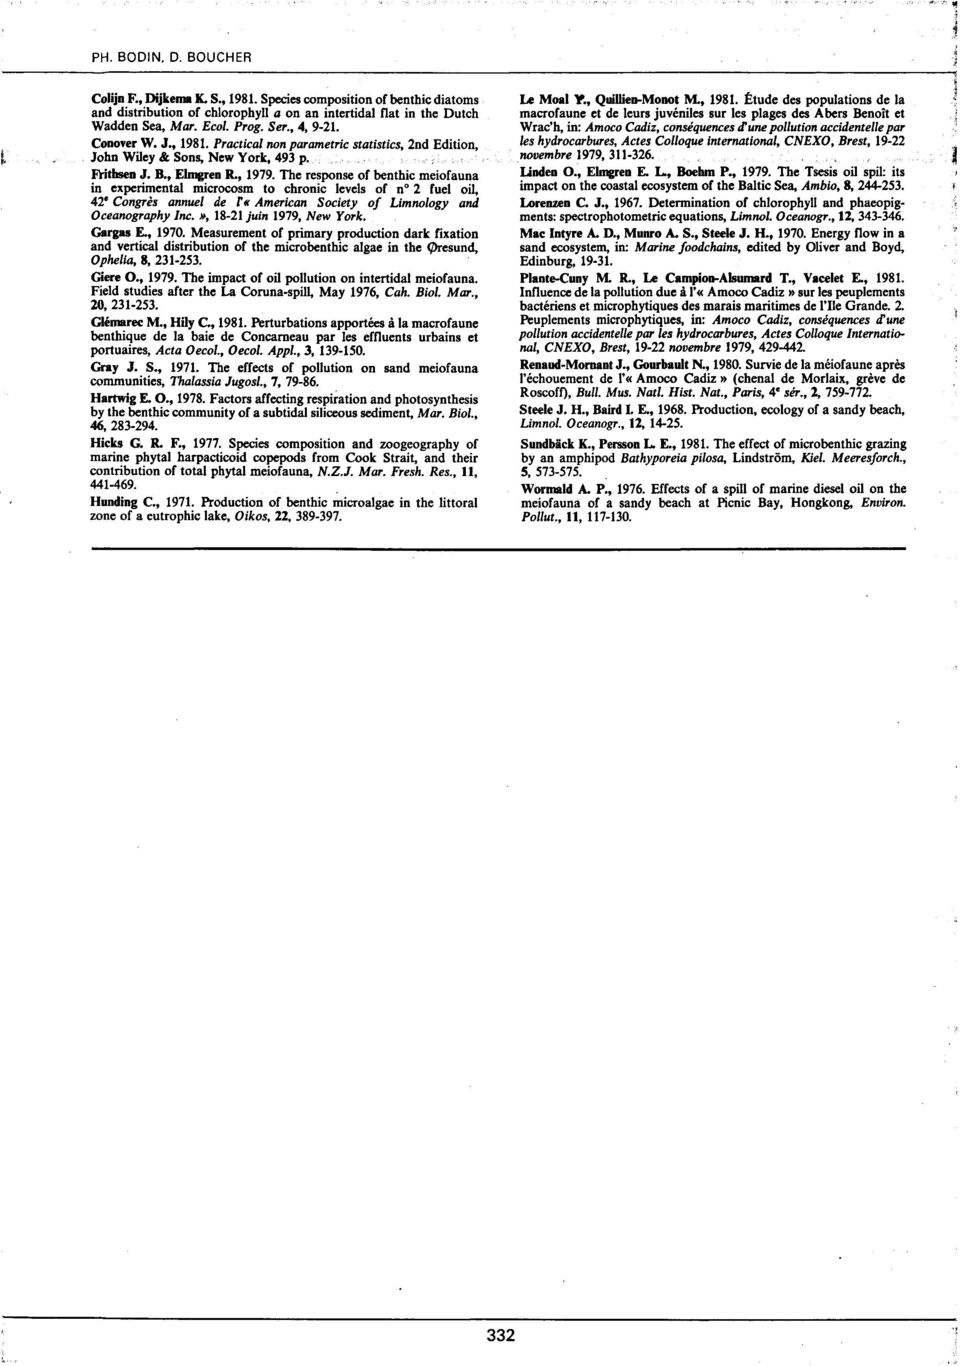 The response of benthic meiofauna in experimental microcosm to chronic levels of no 2 fuel oil, 42 Congrès annuel de f«american Society of Limnology and Oceanography Inc.», 18-21 juin 1979, New York.